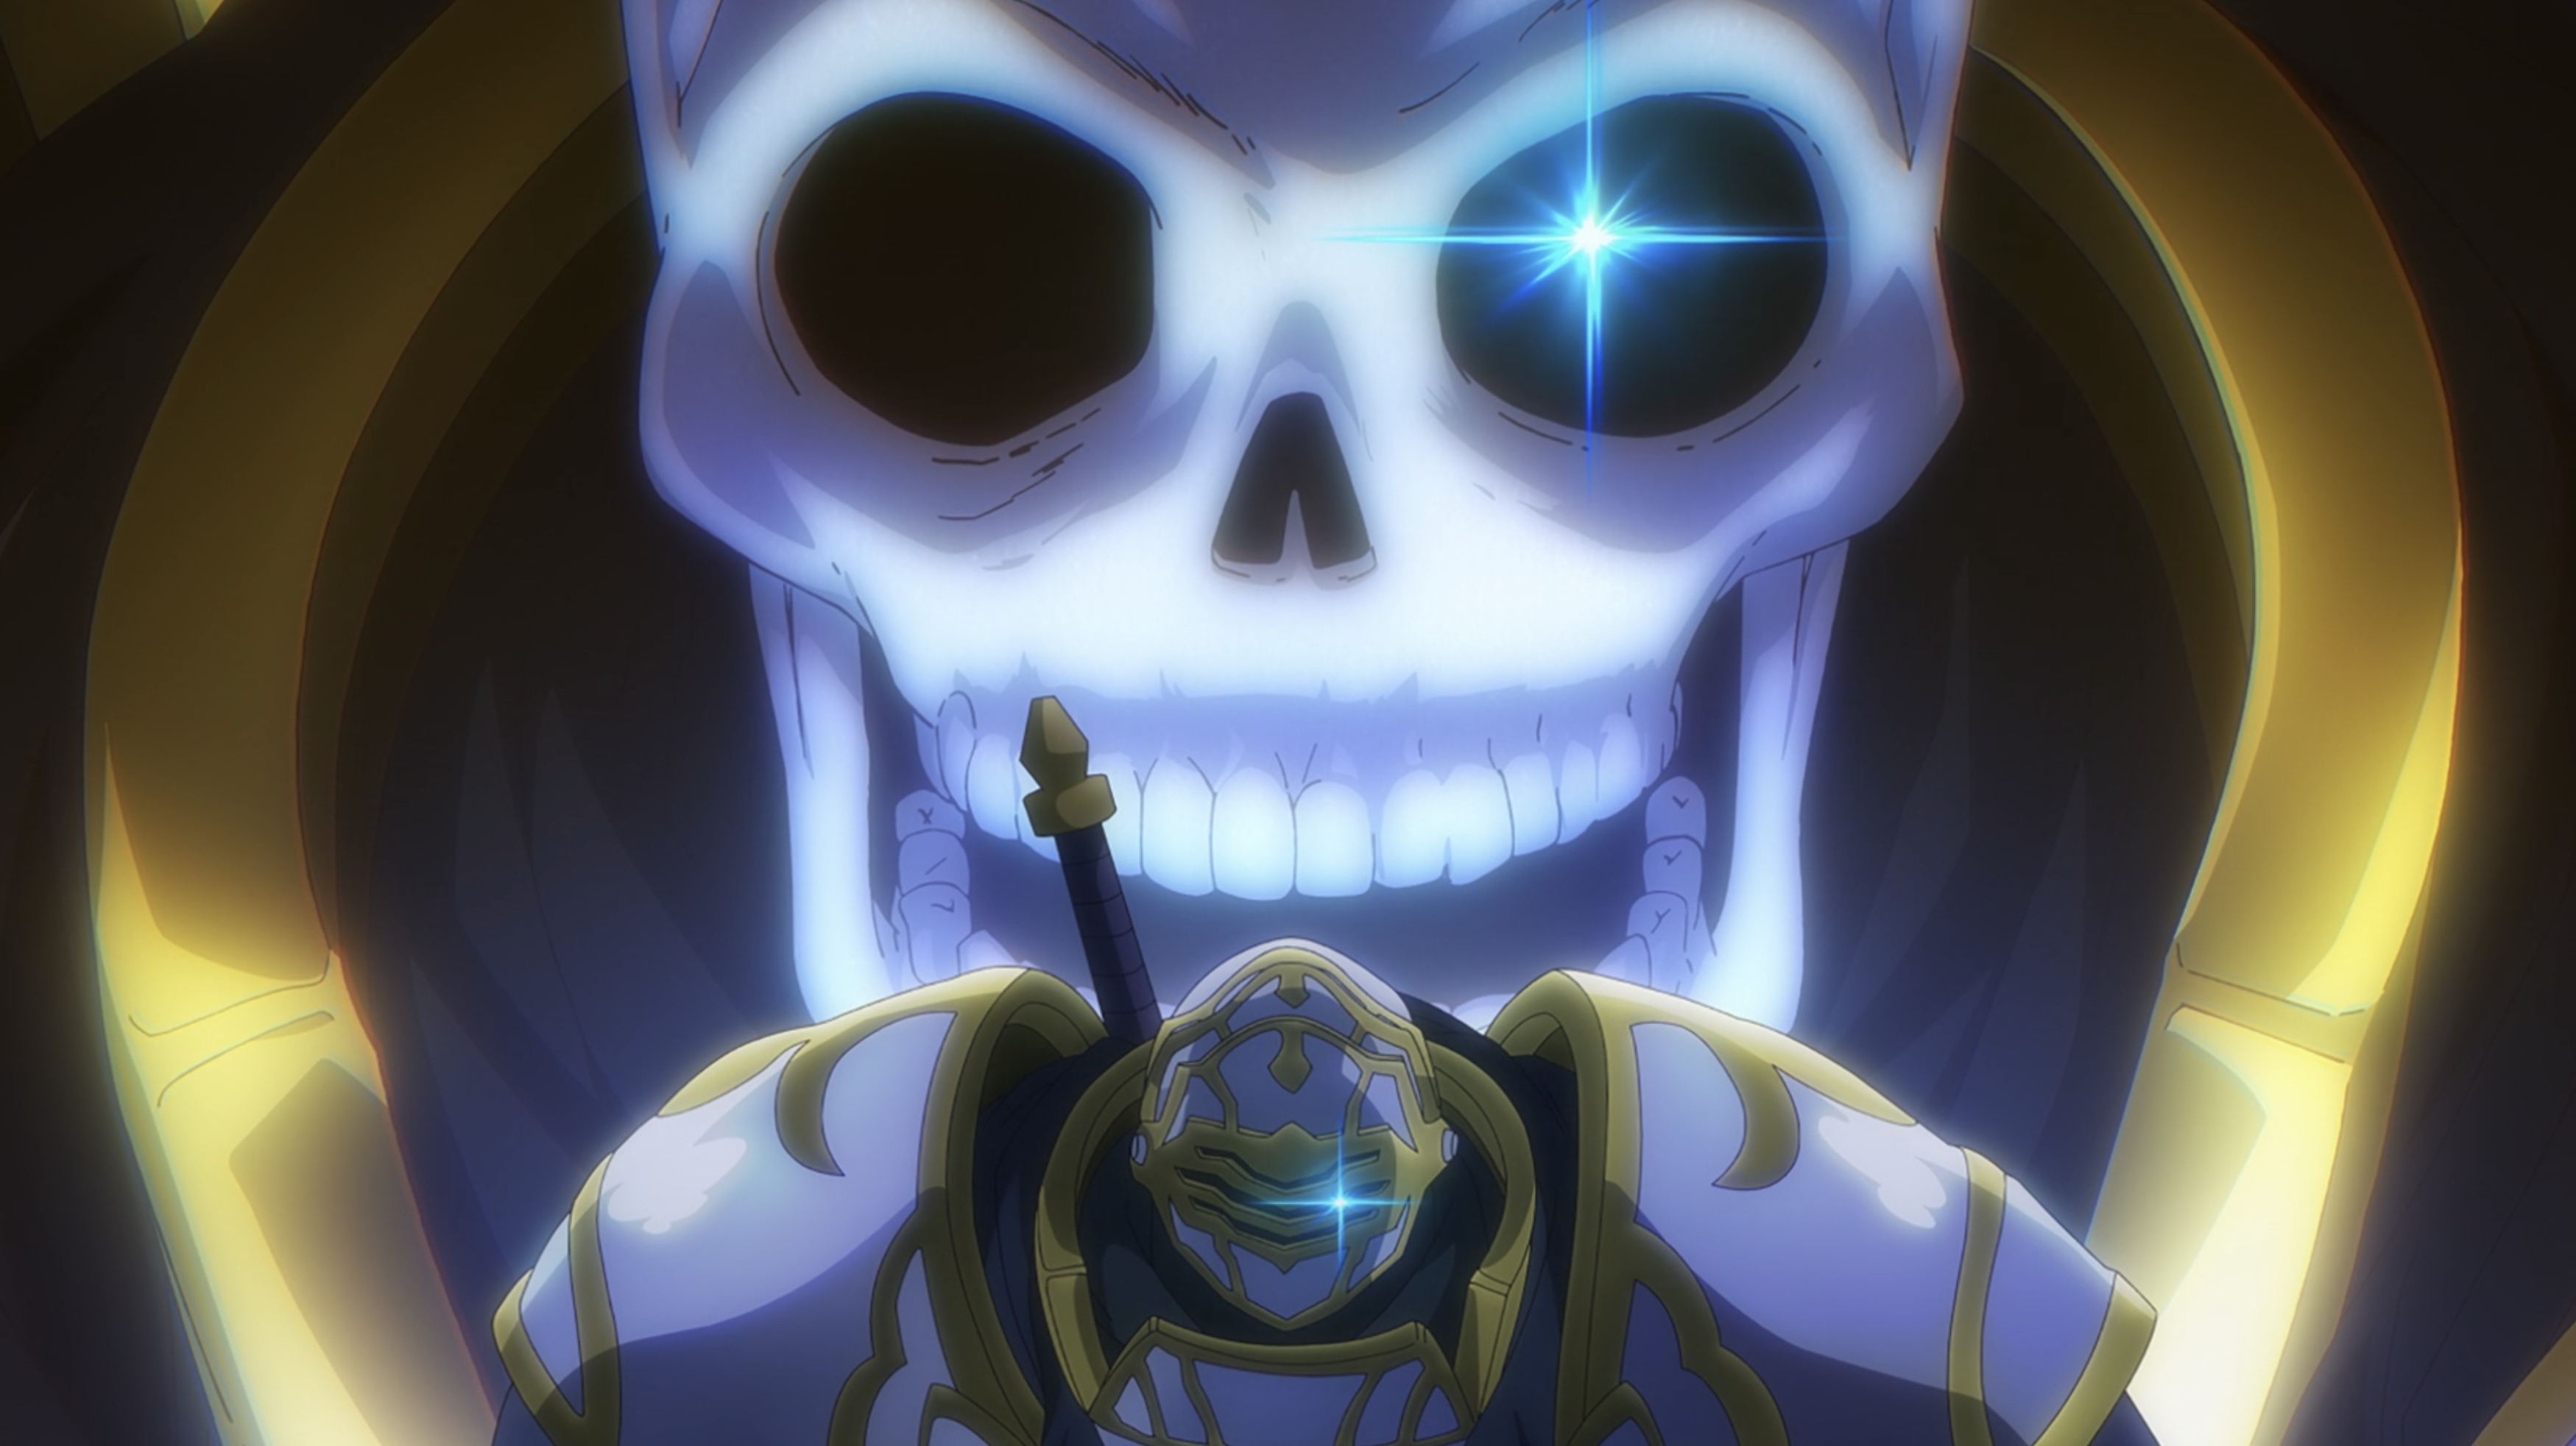 Anime Corner News - JUST IN: Skeleton Knight in Another World TV anime  has been announced! Production: Studio KAI × HORNETS.